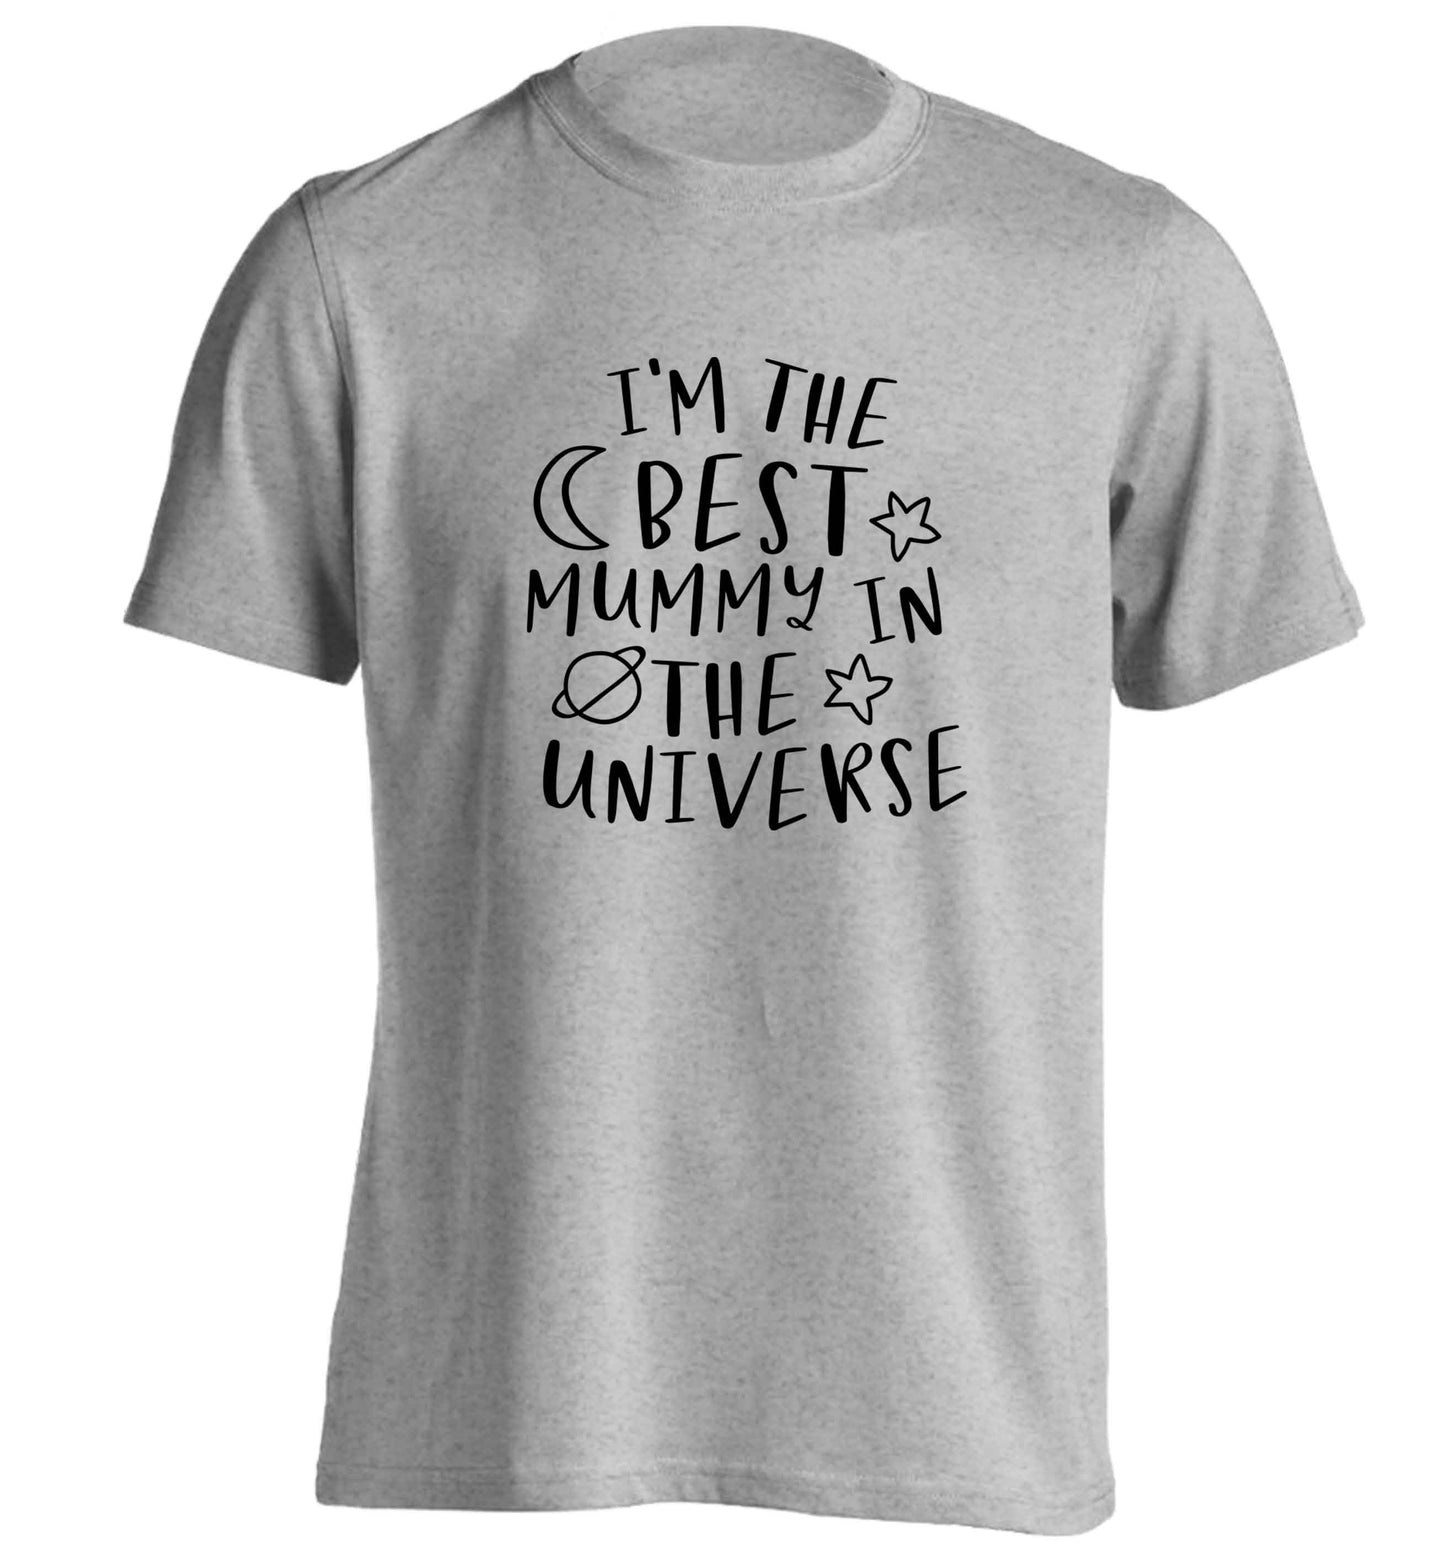 I'm the best mummy in the universe adults unisex grey Tshirt 2XL